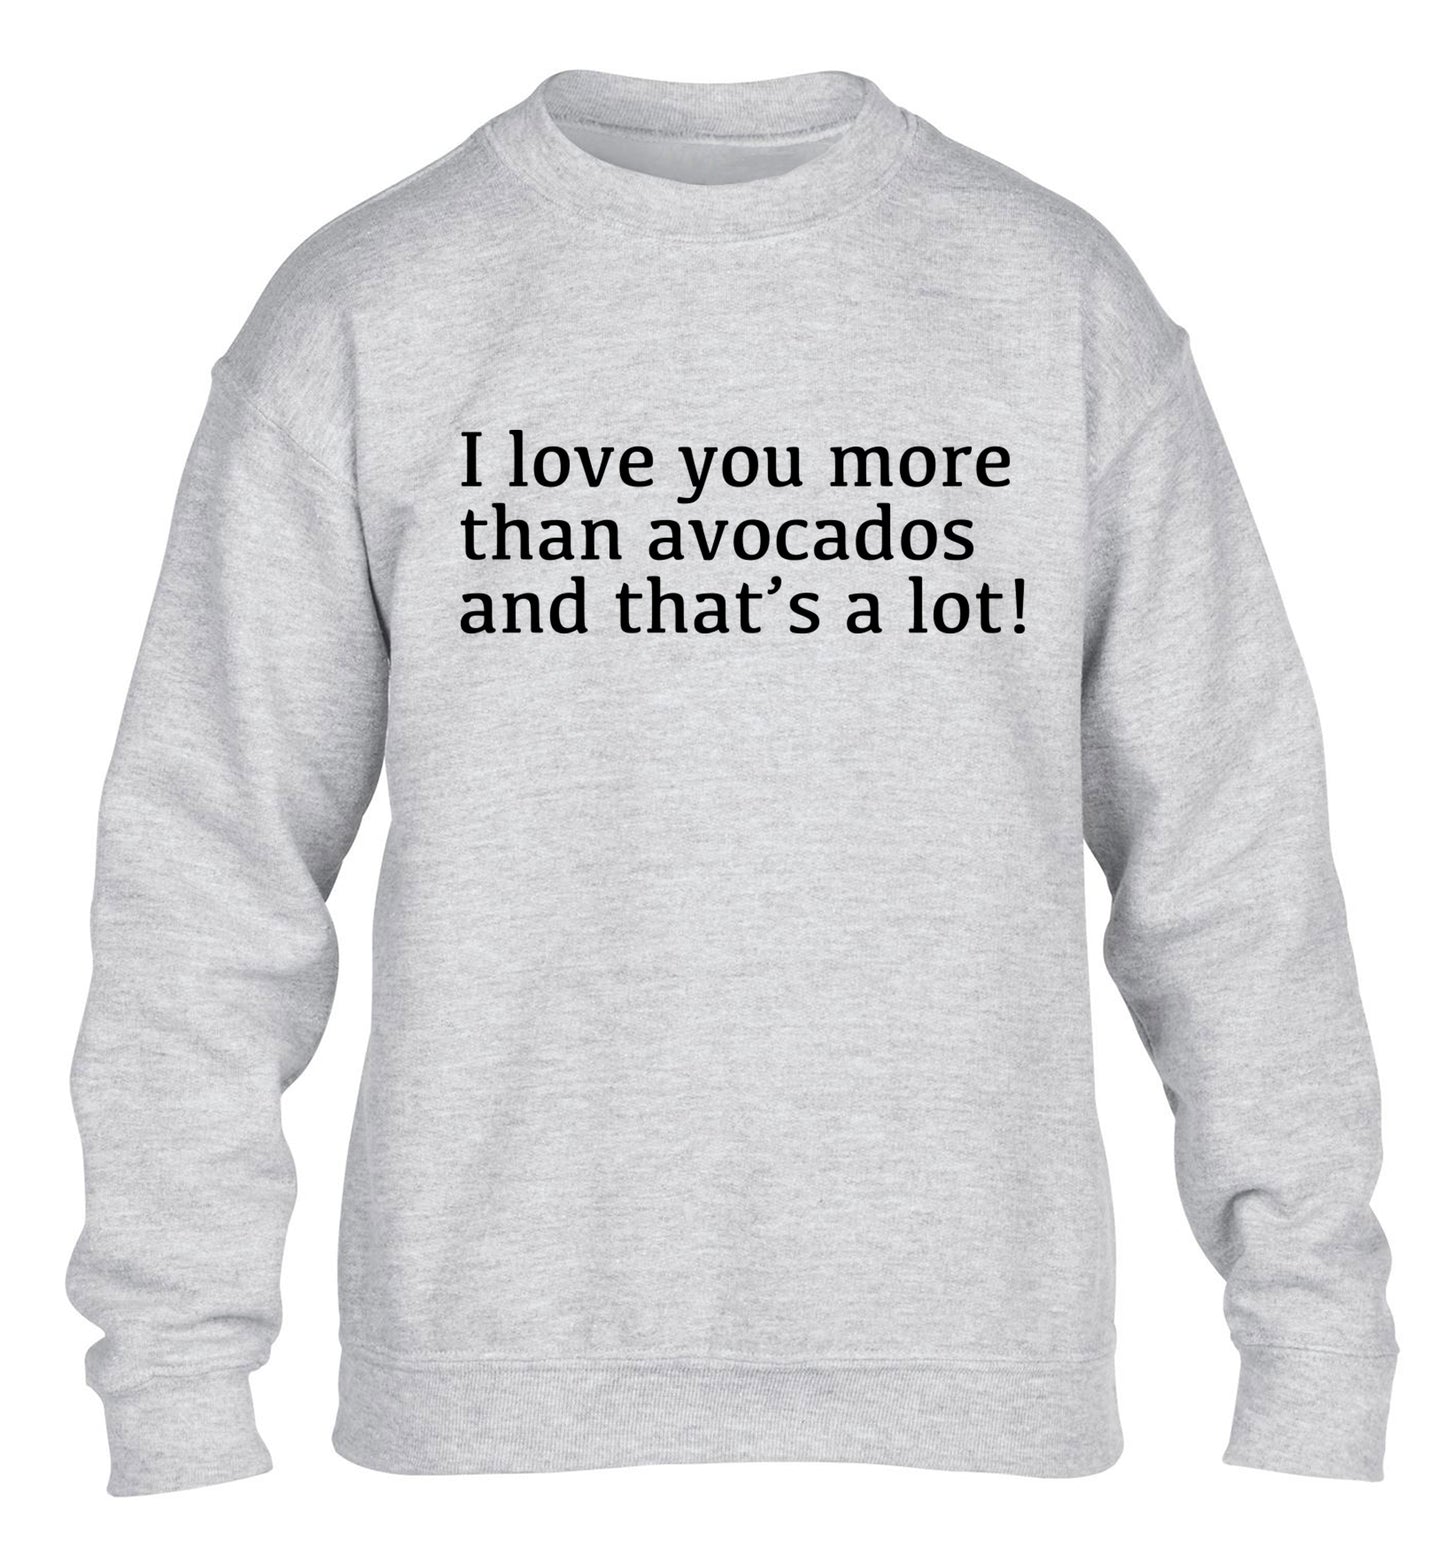 I love you more than avocados and that's a lot children's grey sweater 12-14 Years